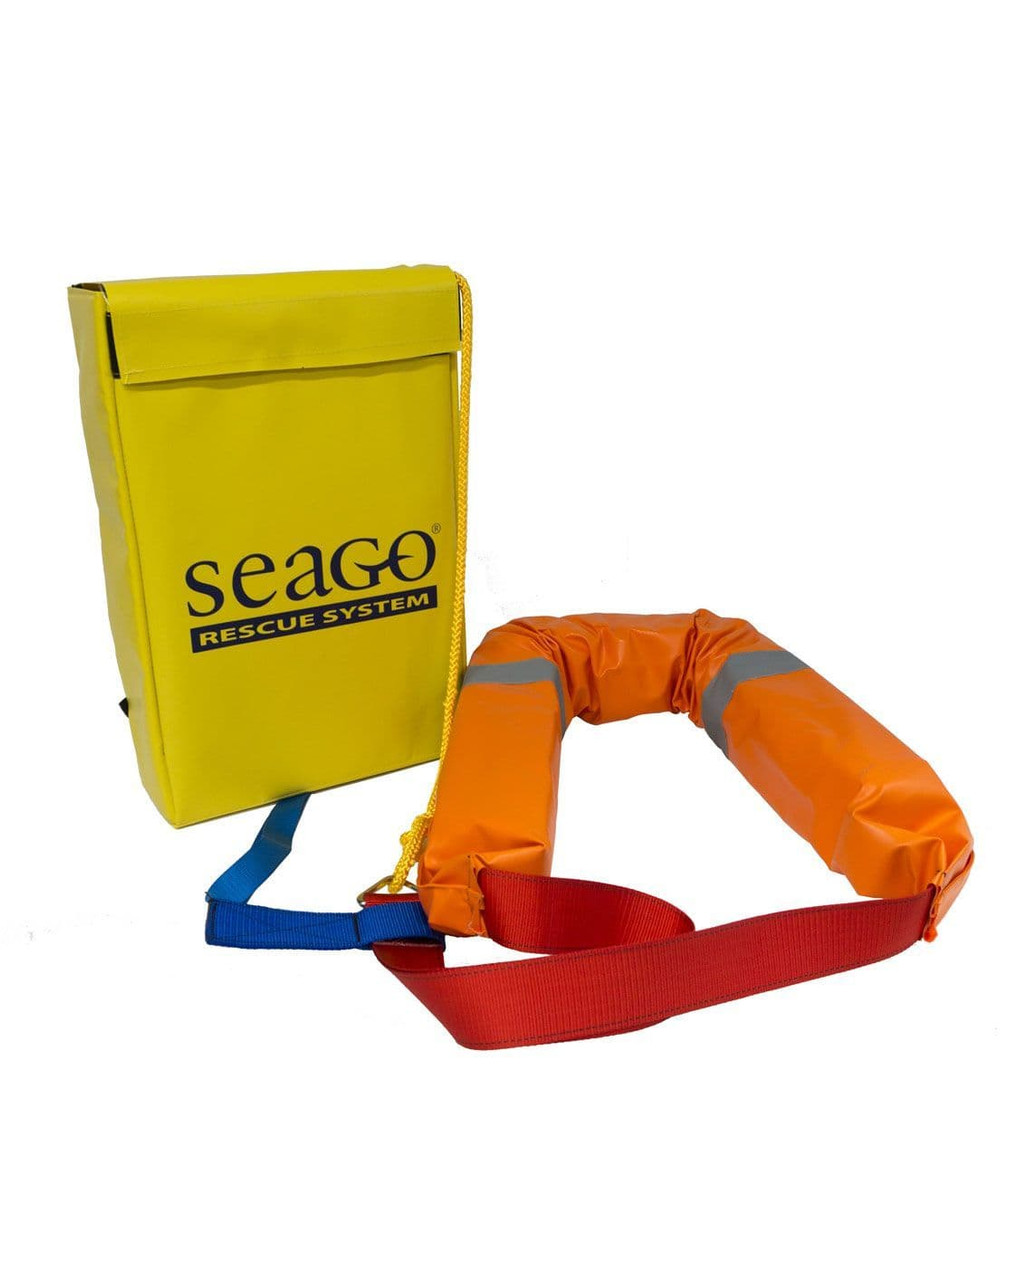 Seago Rescue System Man Overboard Sling with White Cover